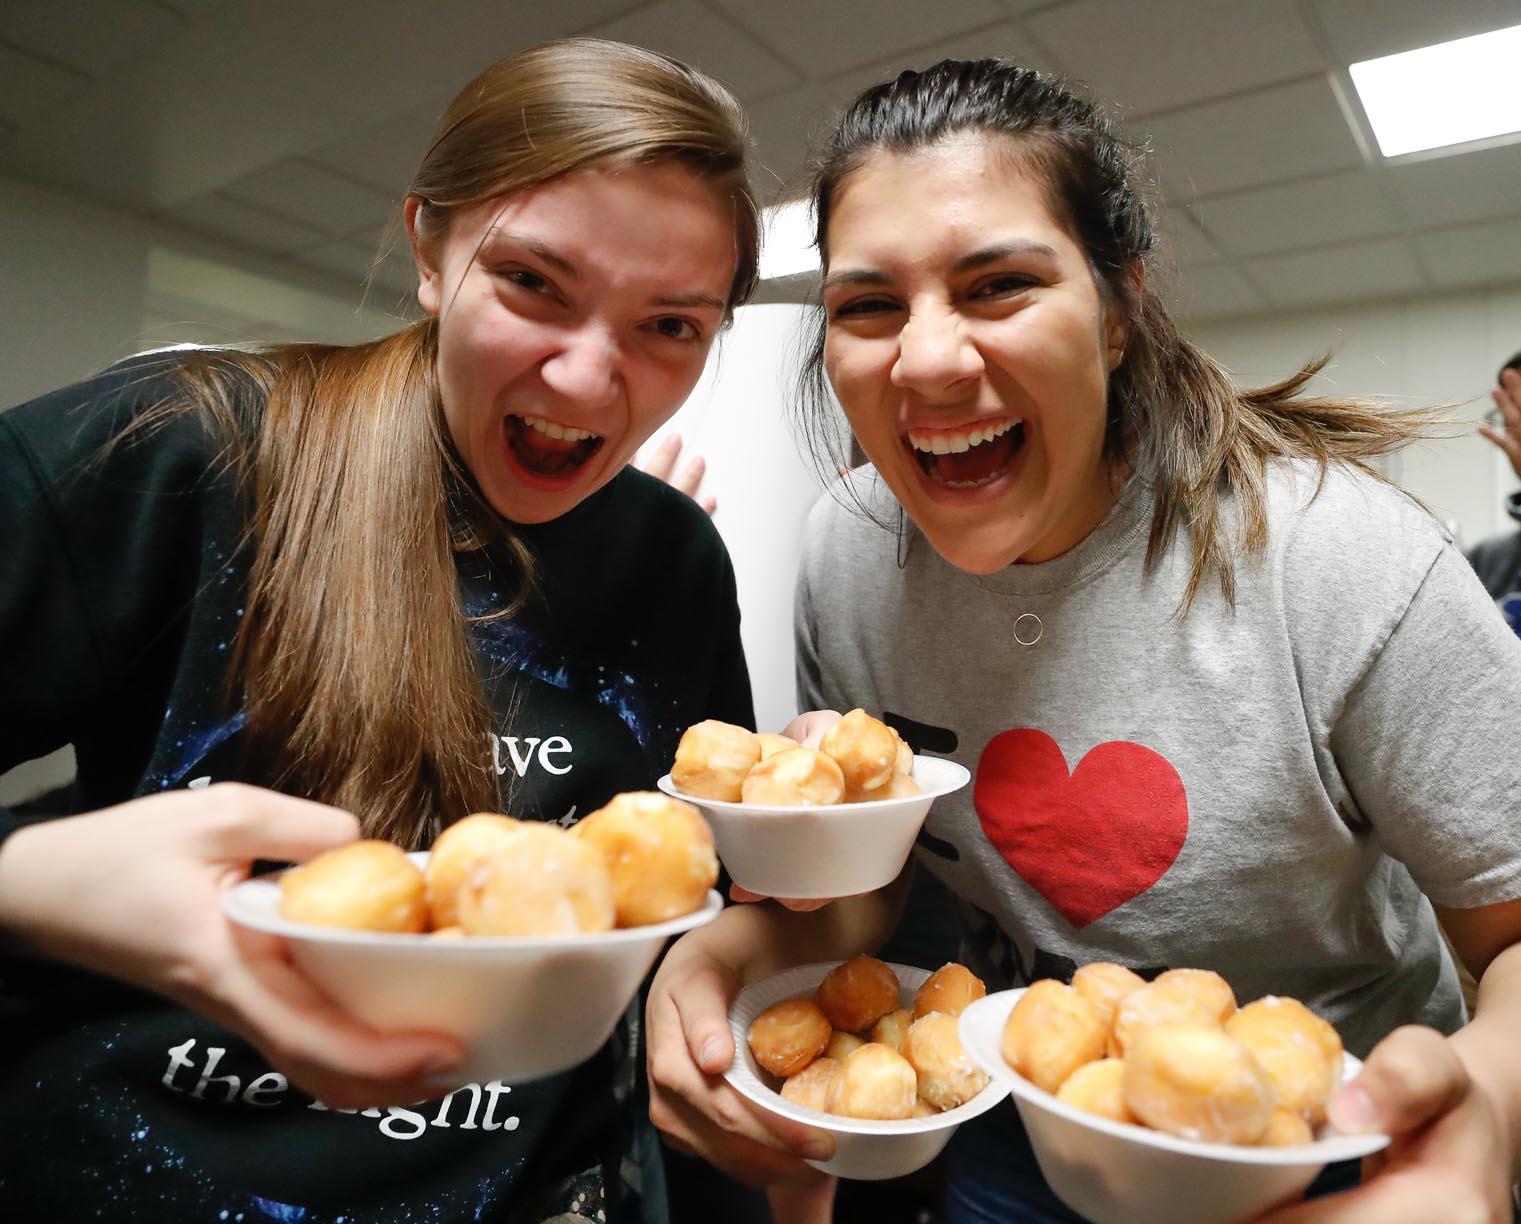 PHOTO GALLERY: Residence Life Community Assembly Night doughnut hole eating contest1521 x 1224